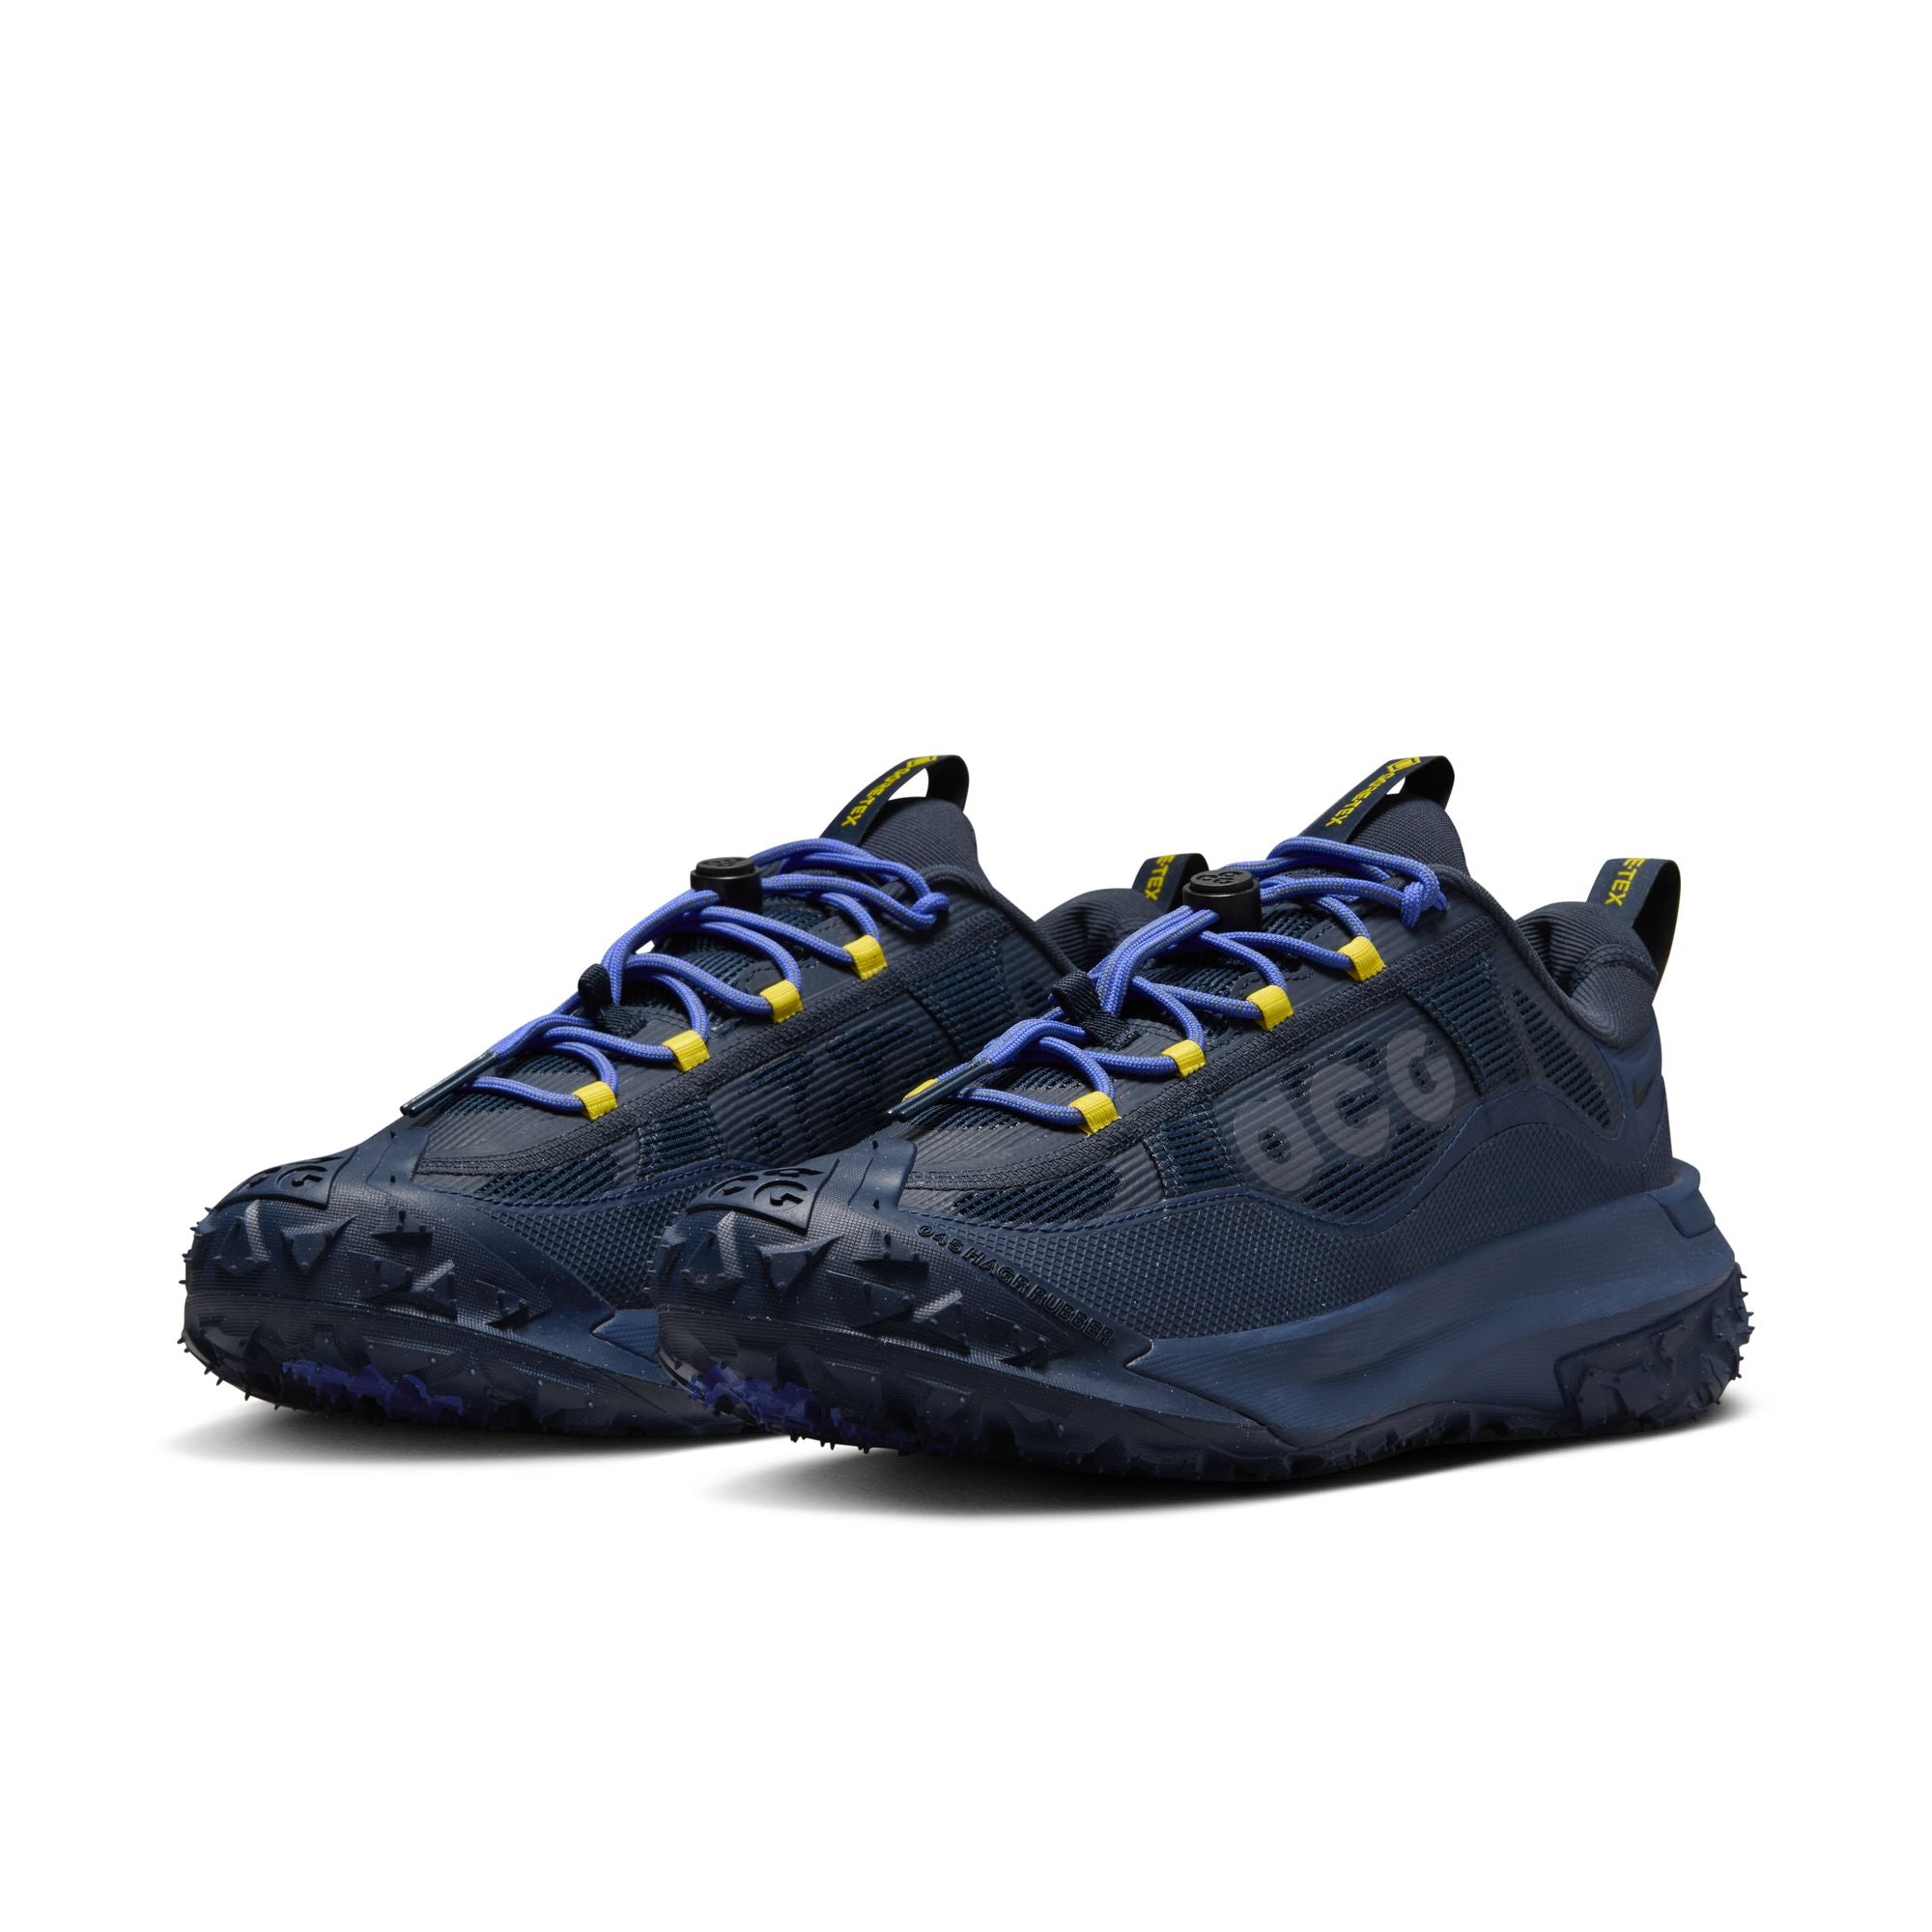 ACG Mountain Fly 2 Low GORE-TEX - INVINCIBLE